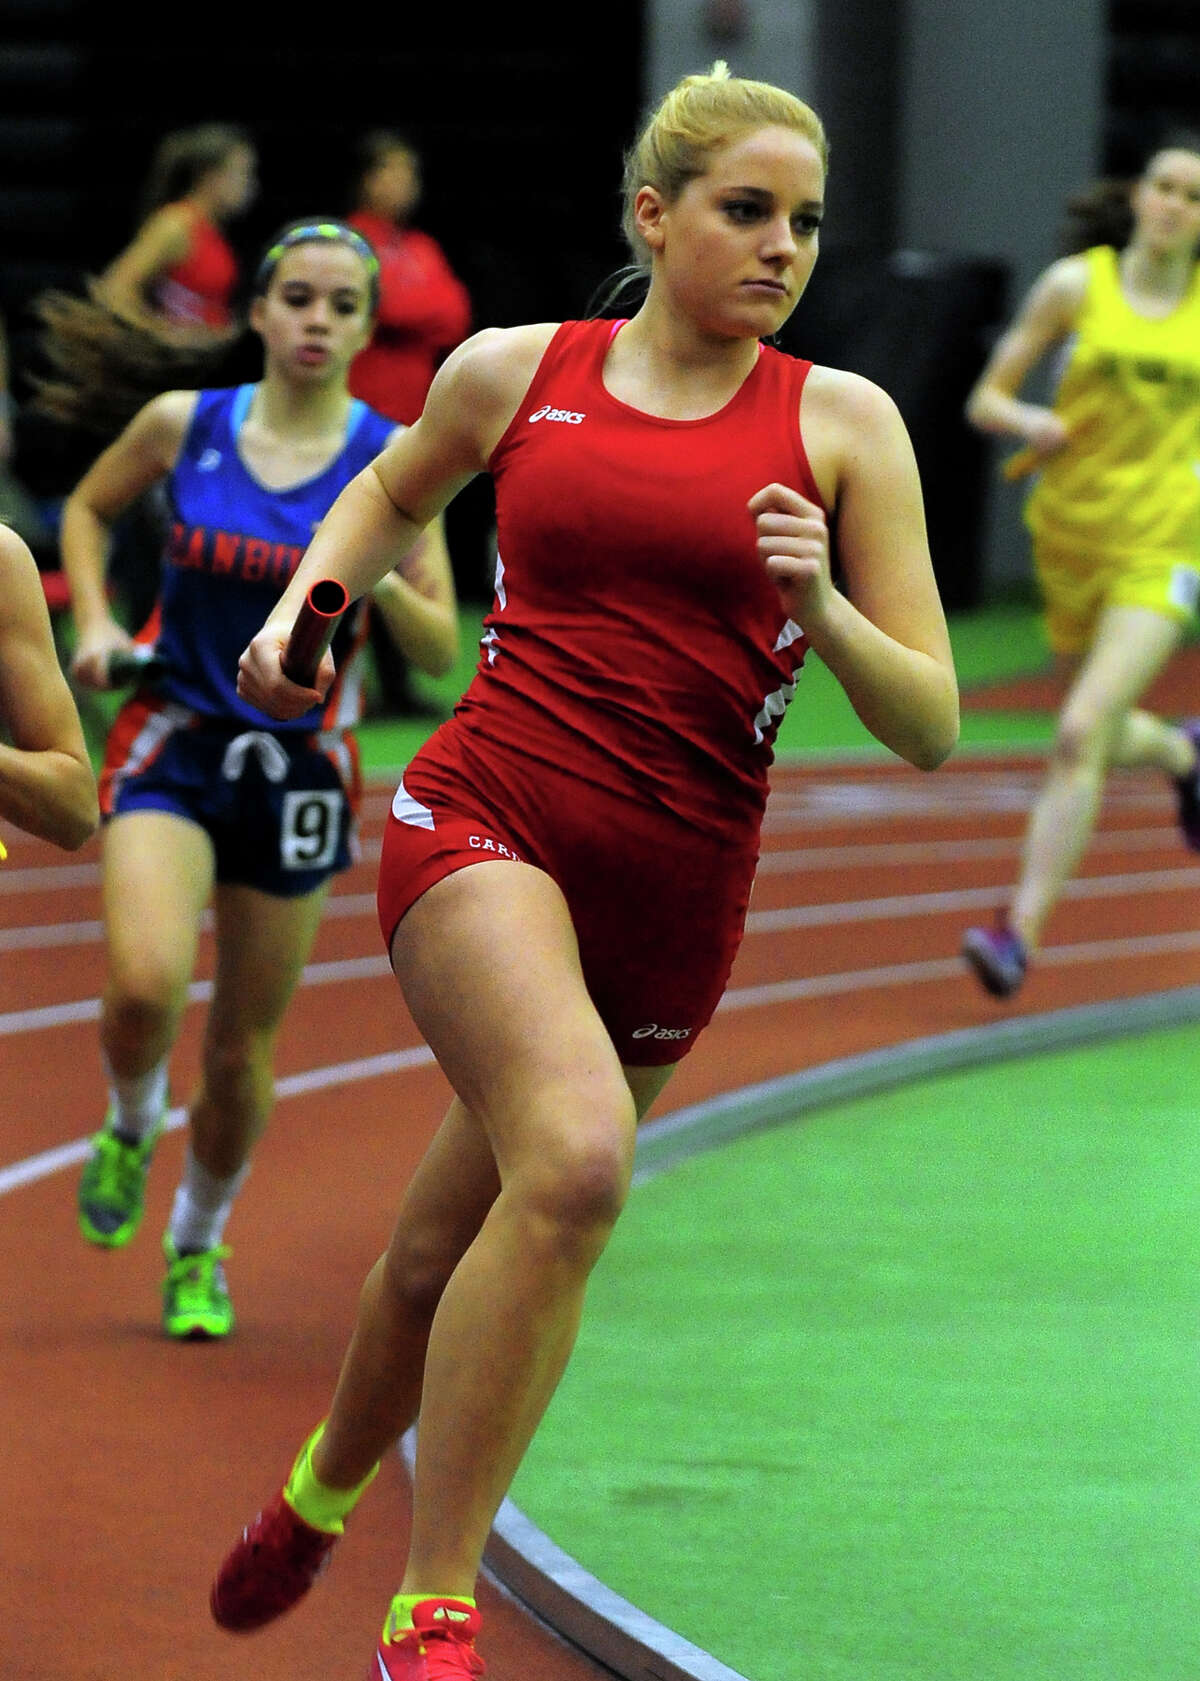 Greenwich's Jenny Goggin competes in a heat of the 4X800 meter relay, during FCIAC track championship action in New Haven, Conn. on Tuesday Feb. 5, 2015.